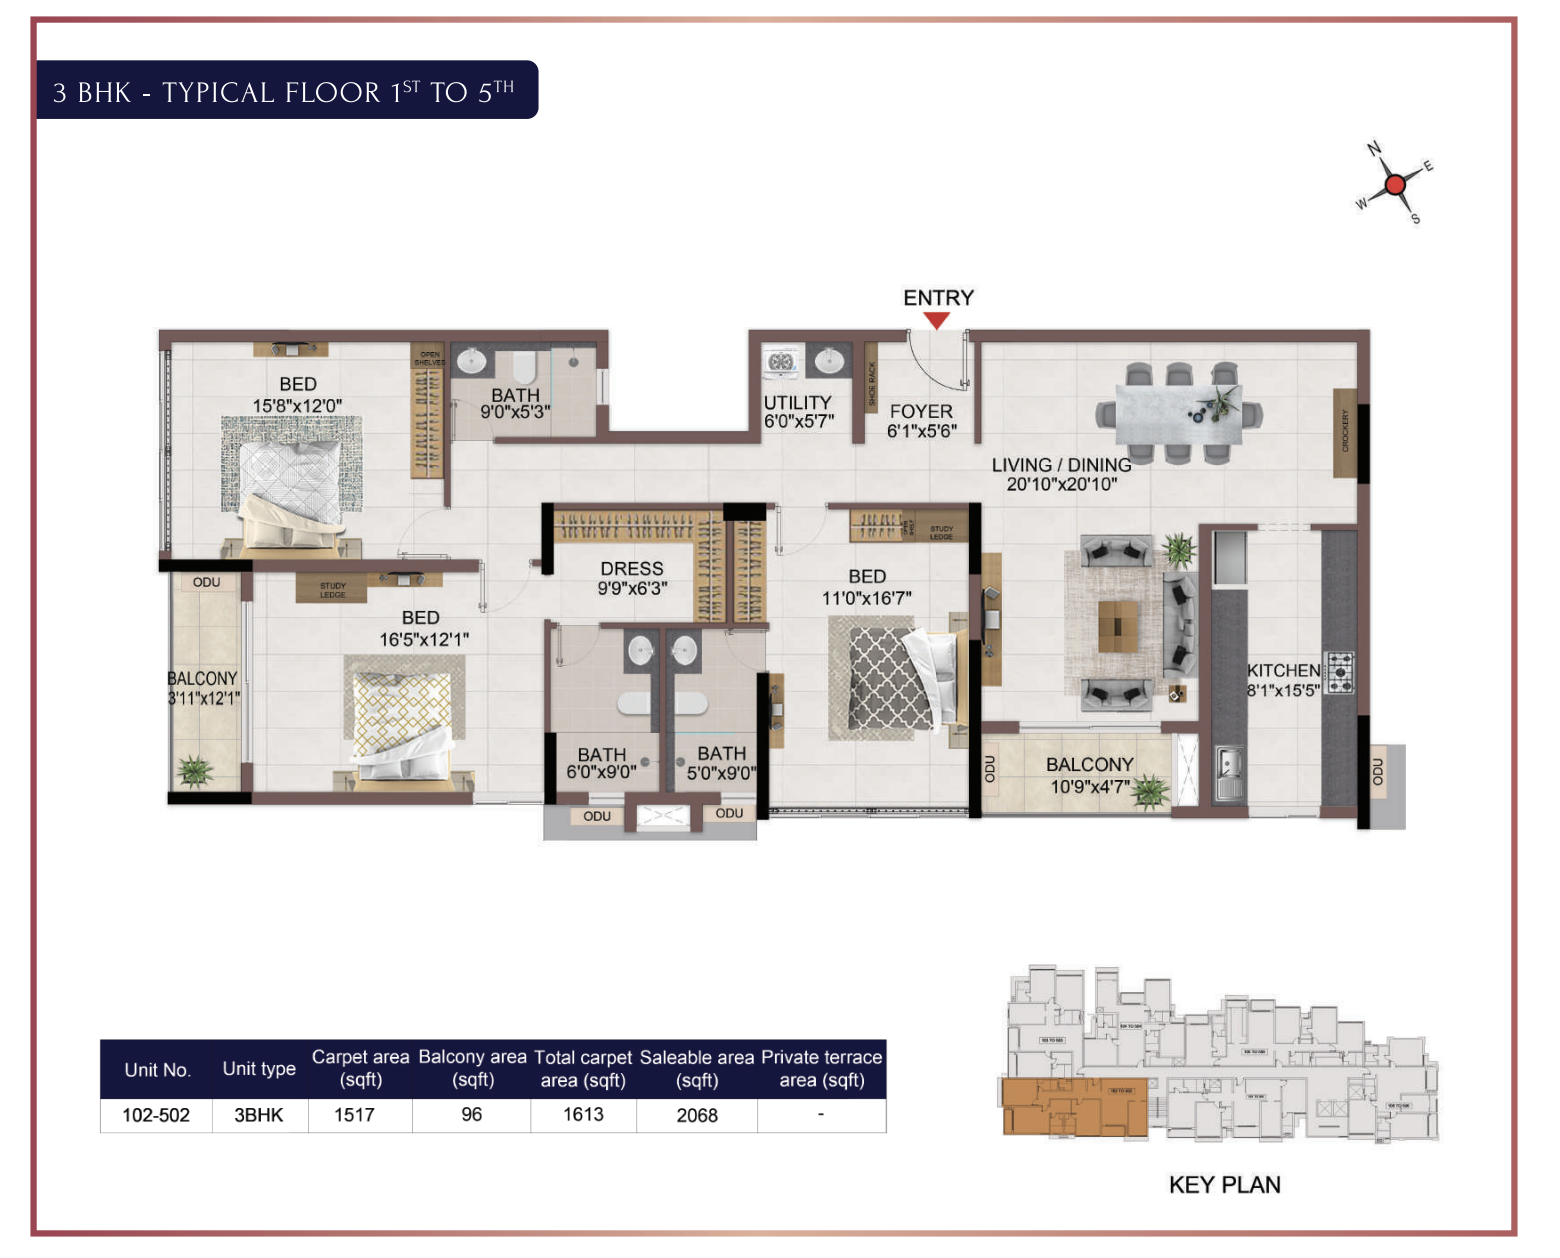 Casagrand Dior - 3BHK - Typical Floor Plan - 1st to 5th